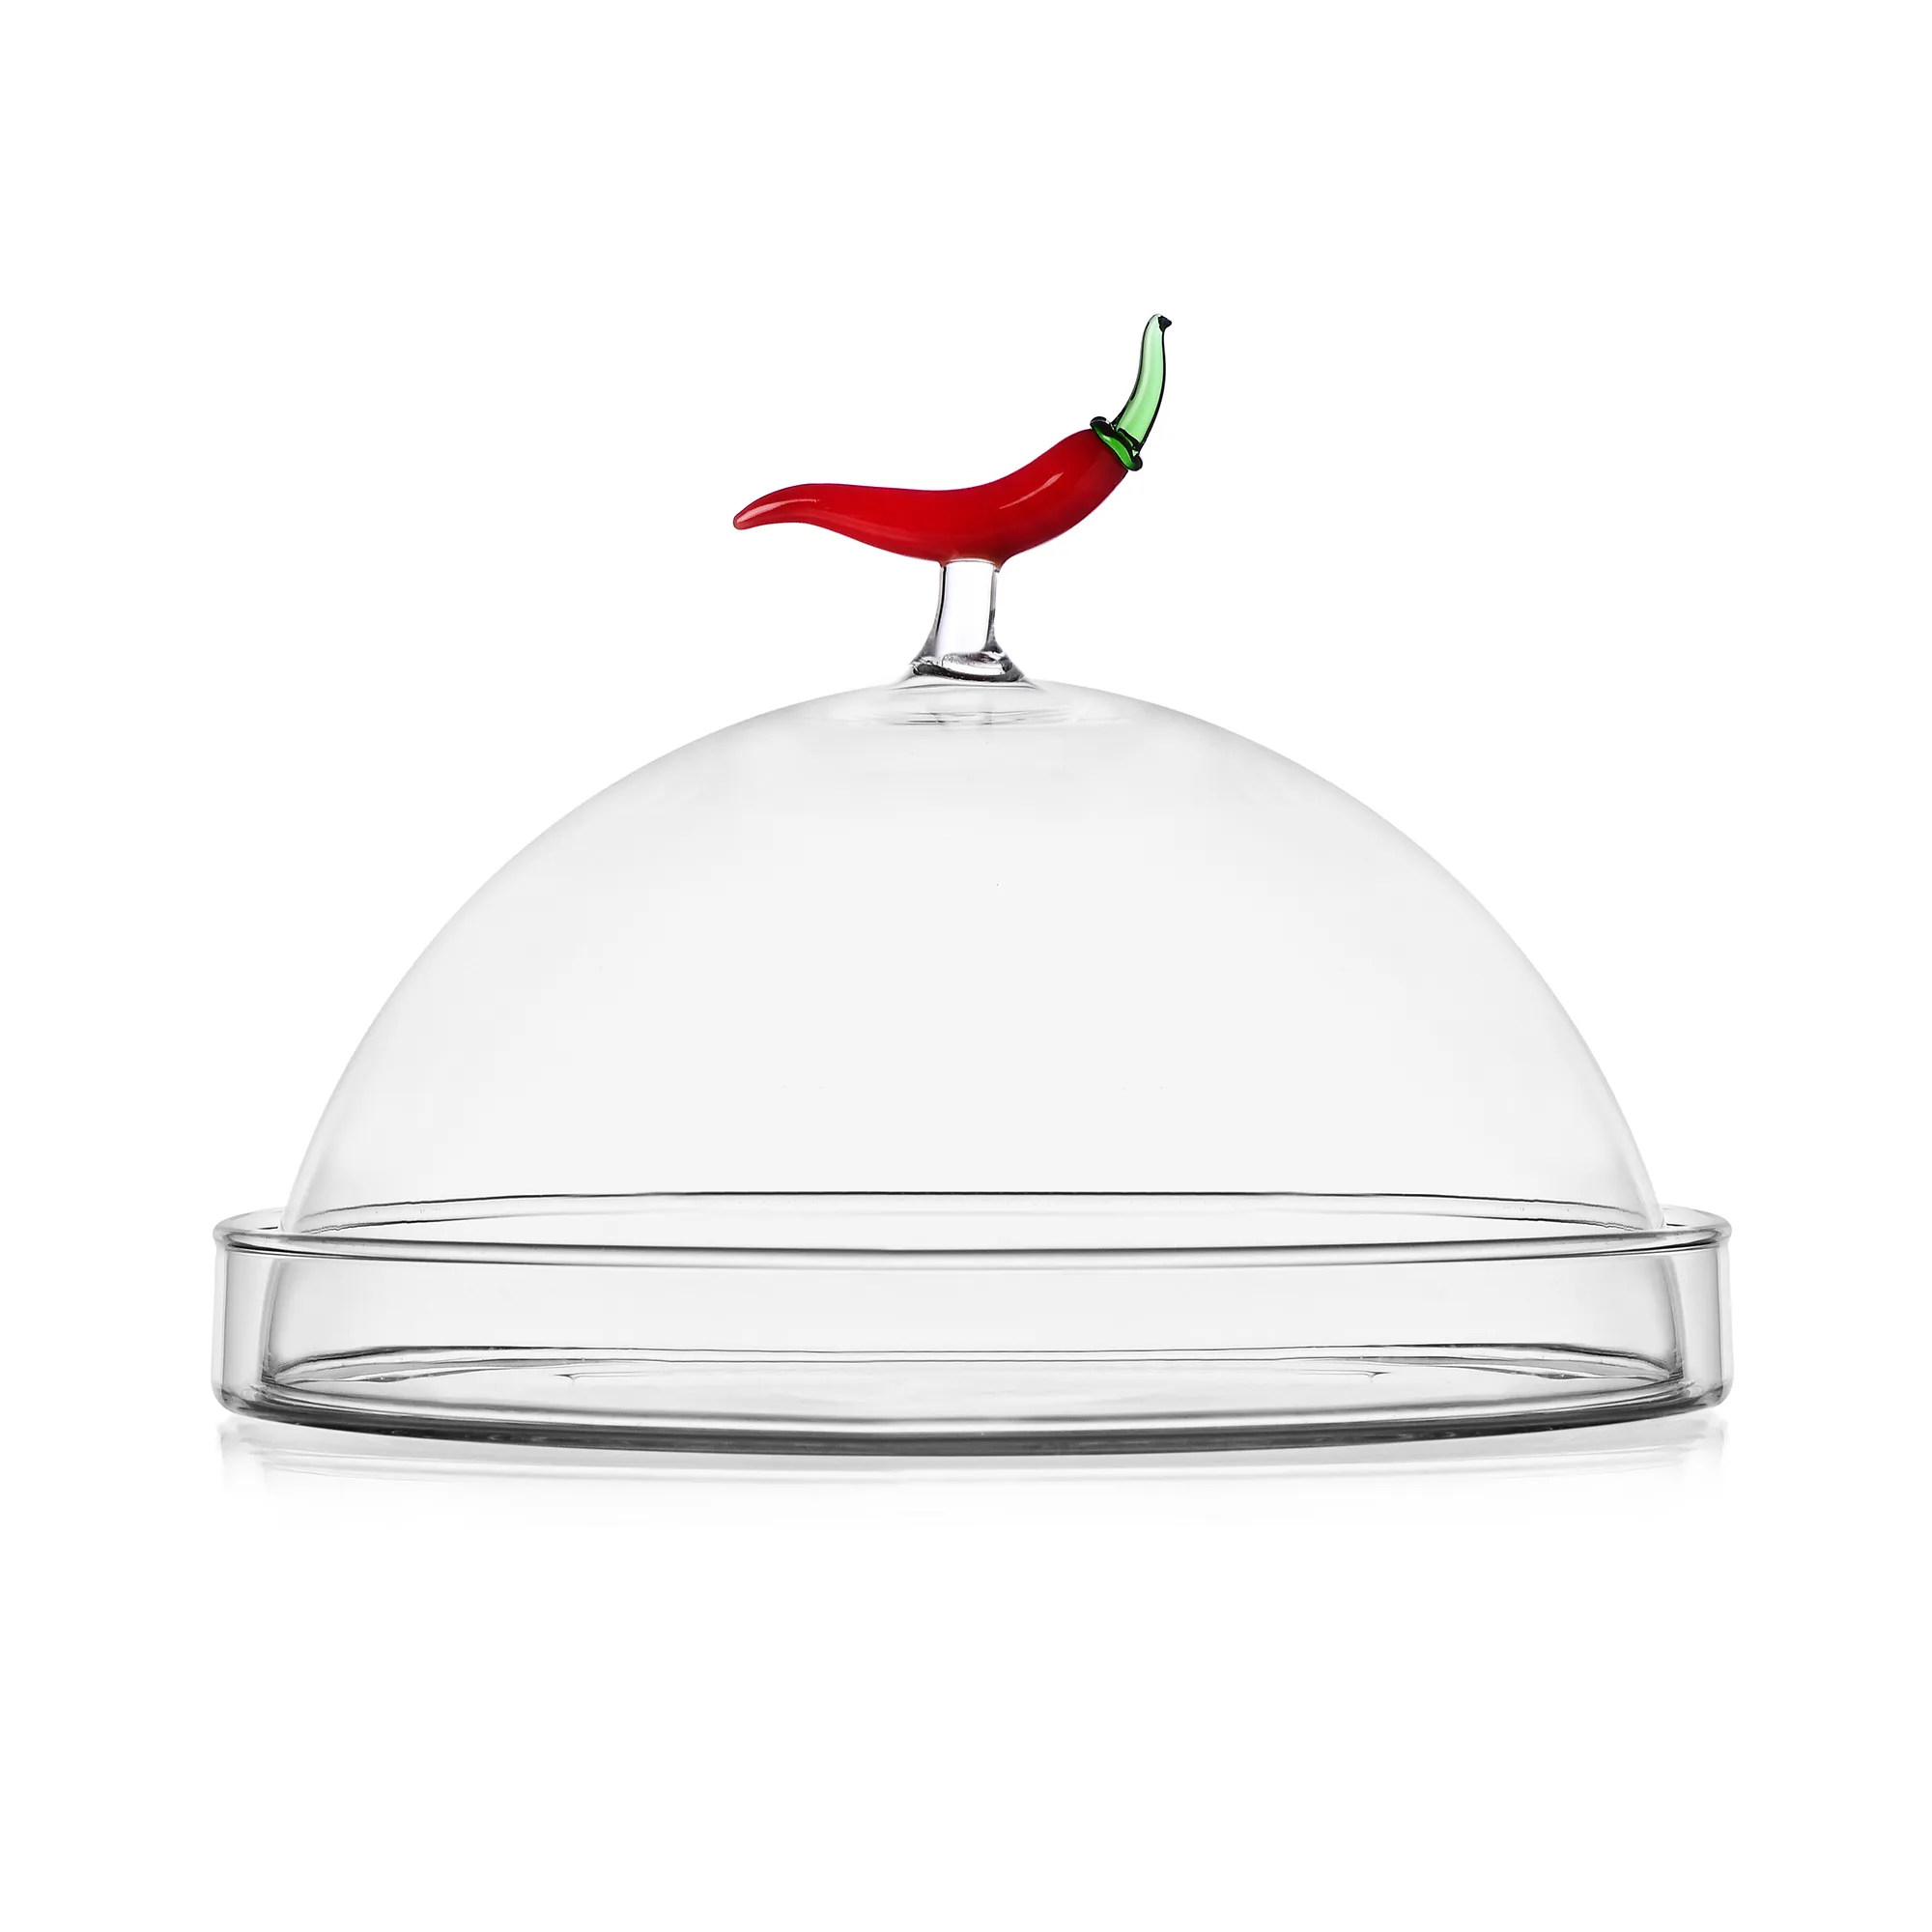 Dome with Plate Ichendorf Vegetables Collection Chili Pepper